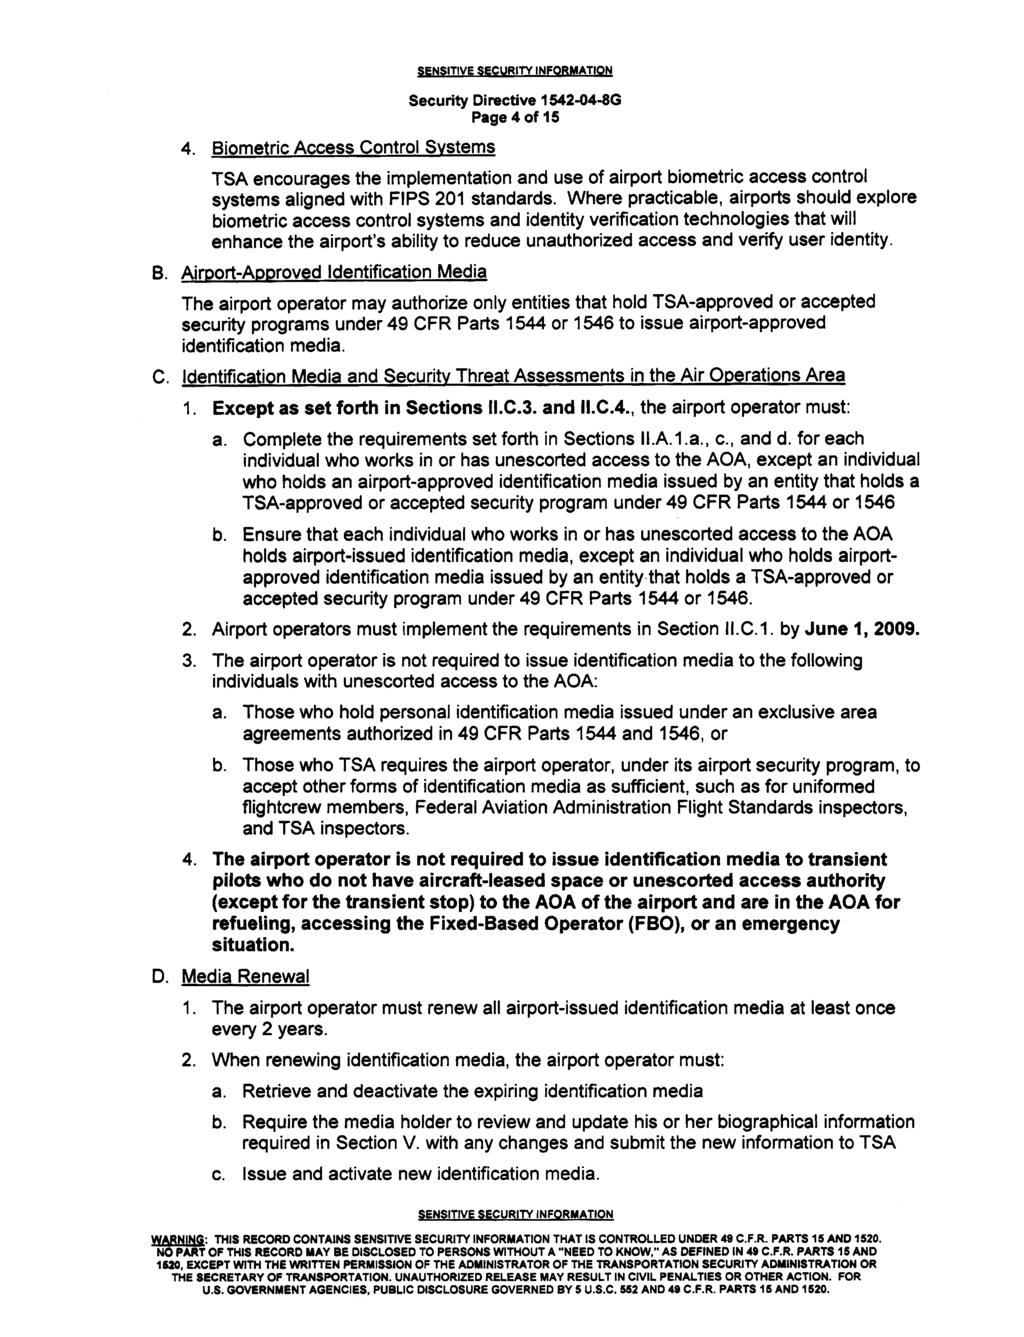 4. Biometric Access Control Systems Page 4 of 15 TSA encourages the implementation and use of airport biometric access control systems aligned with FIPS 201 standards.